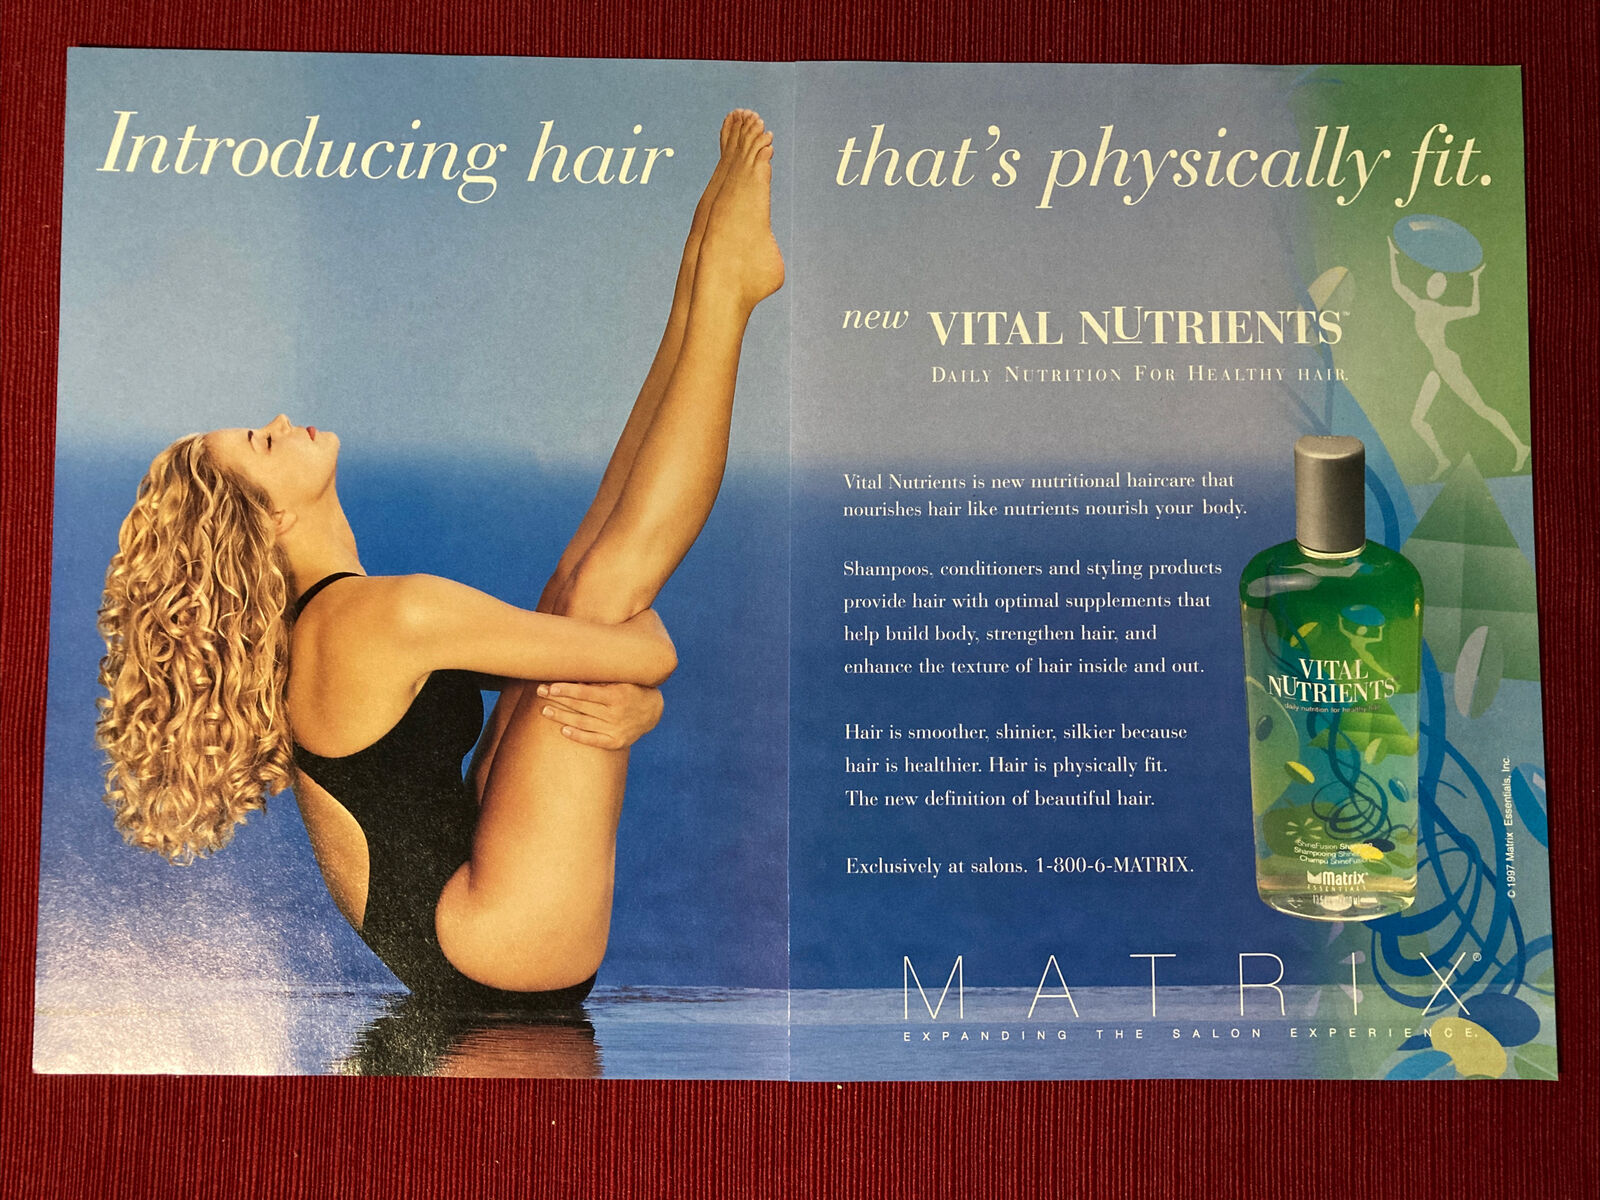 Vital Nutrients by Matrix Sexy Woman 2-page 1997 Print Ad - Great to Frame